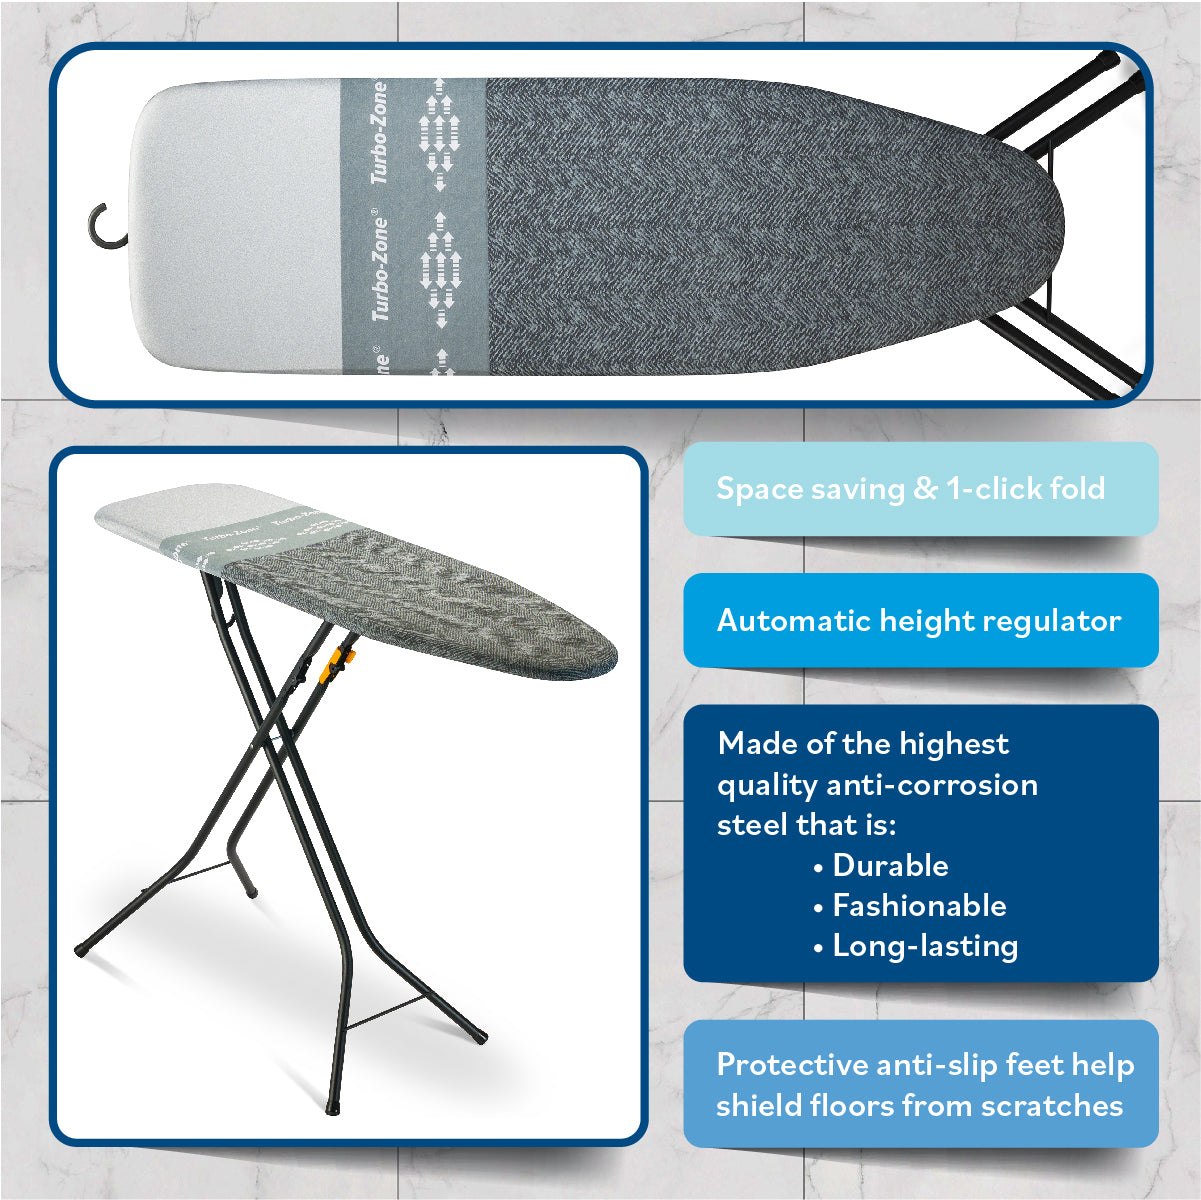 Bartnelli Smart Hanger Ironing Board with New Patent Technology | Made in Europe with Patent Fast-Glide Turbo & Park Zone, 4 Layer Cover Pad | 4 Premium Steel Legs (Size 43x13) (BLACK HERRINGBONE)